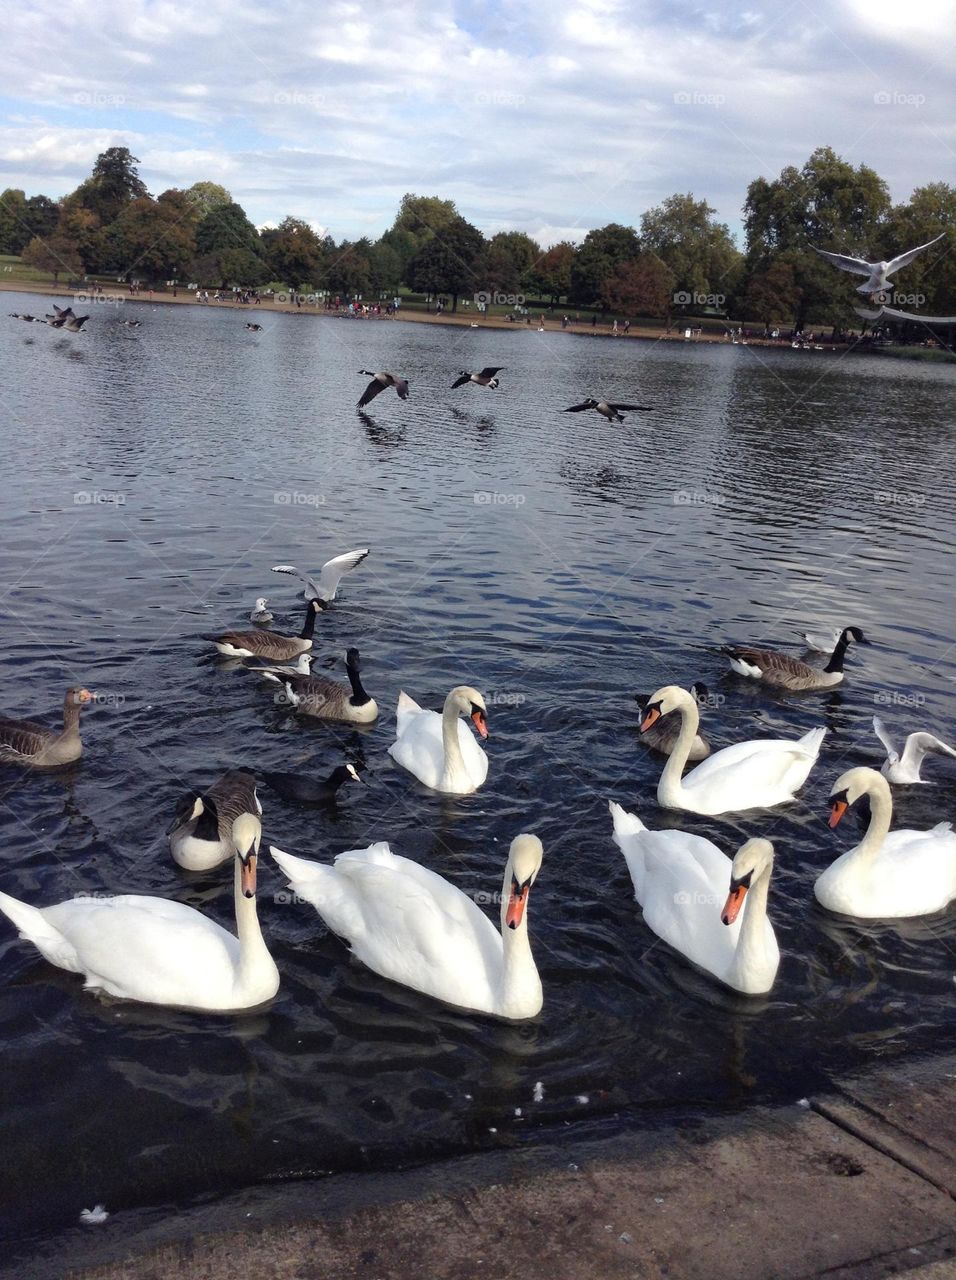 Groups of swans, doves and ducks swimming at a lake in England 